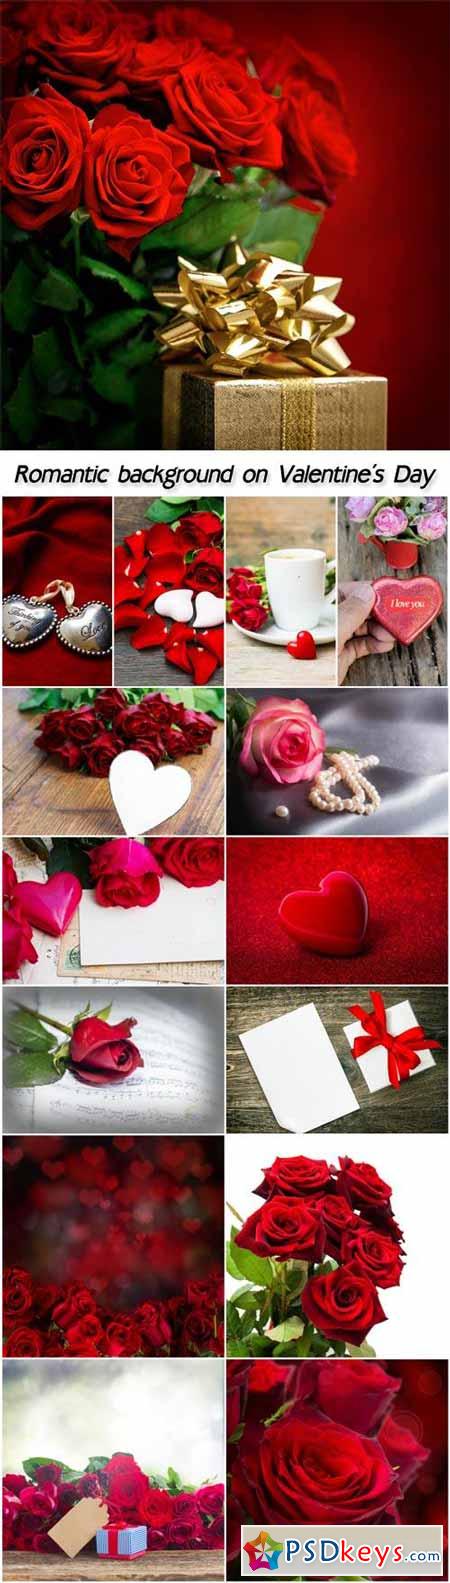 Romantic background on Valentine's Day, hearts and roses